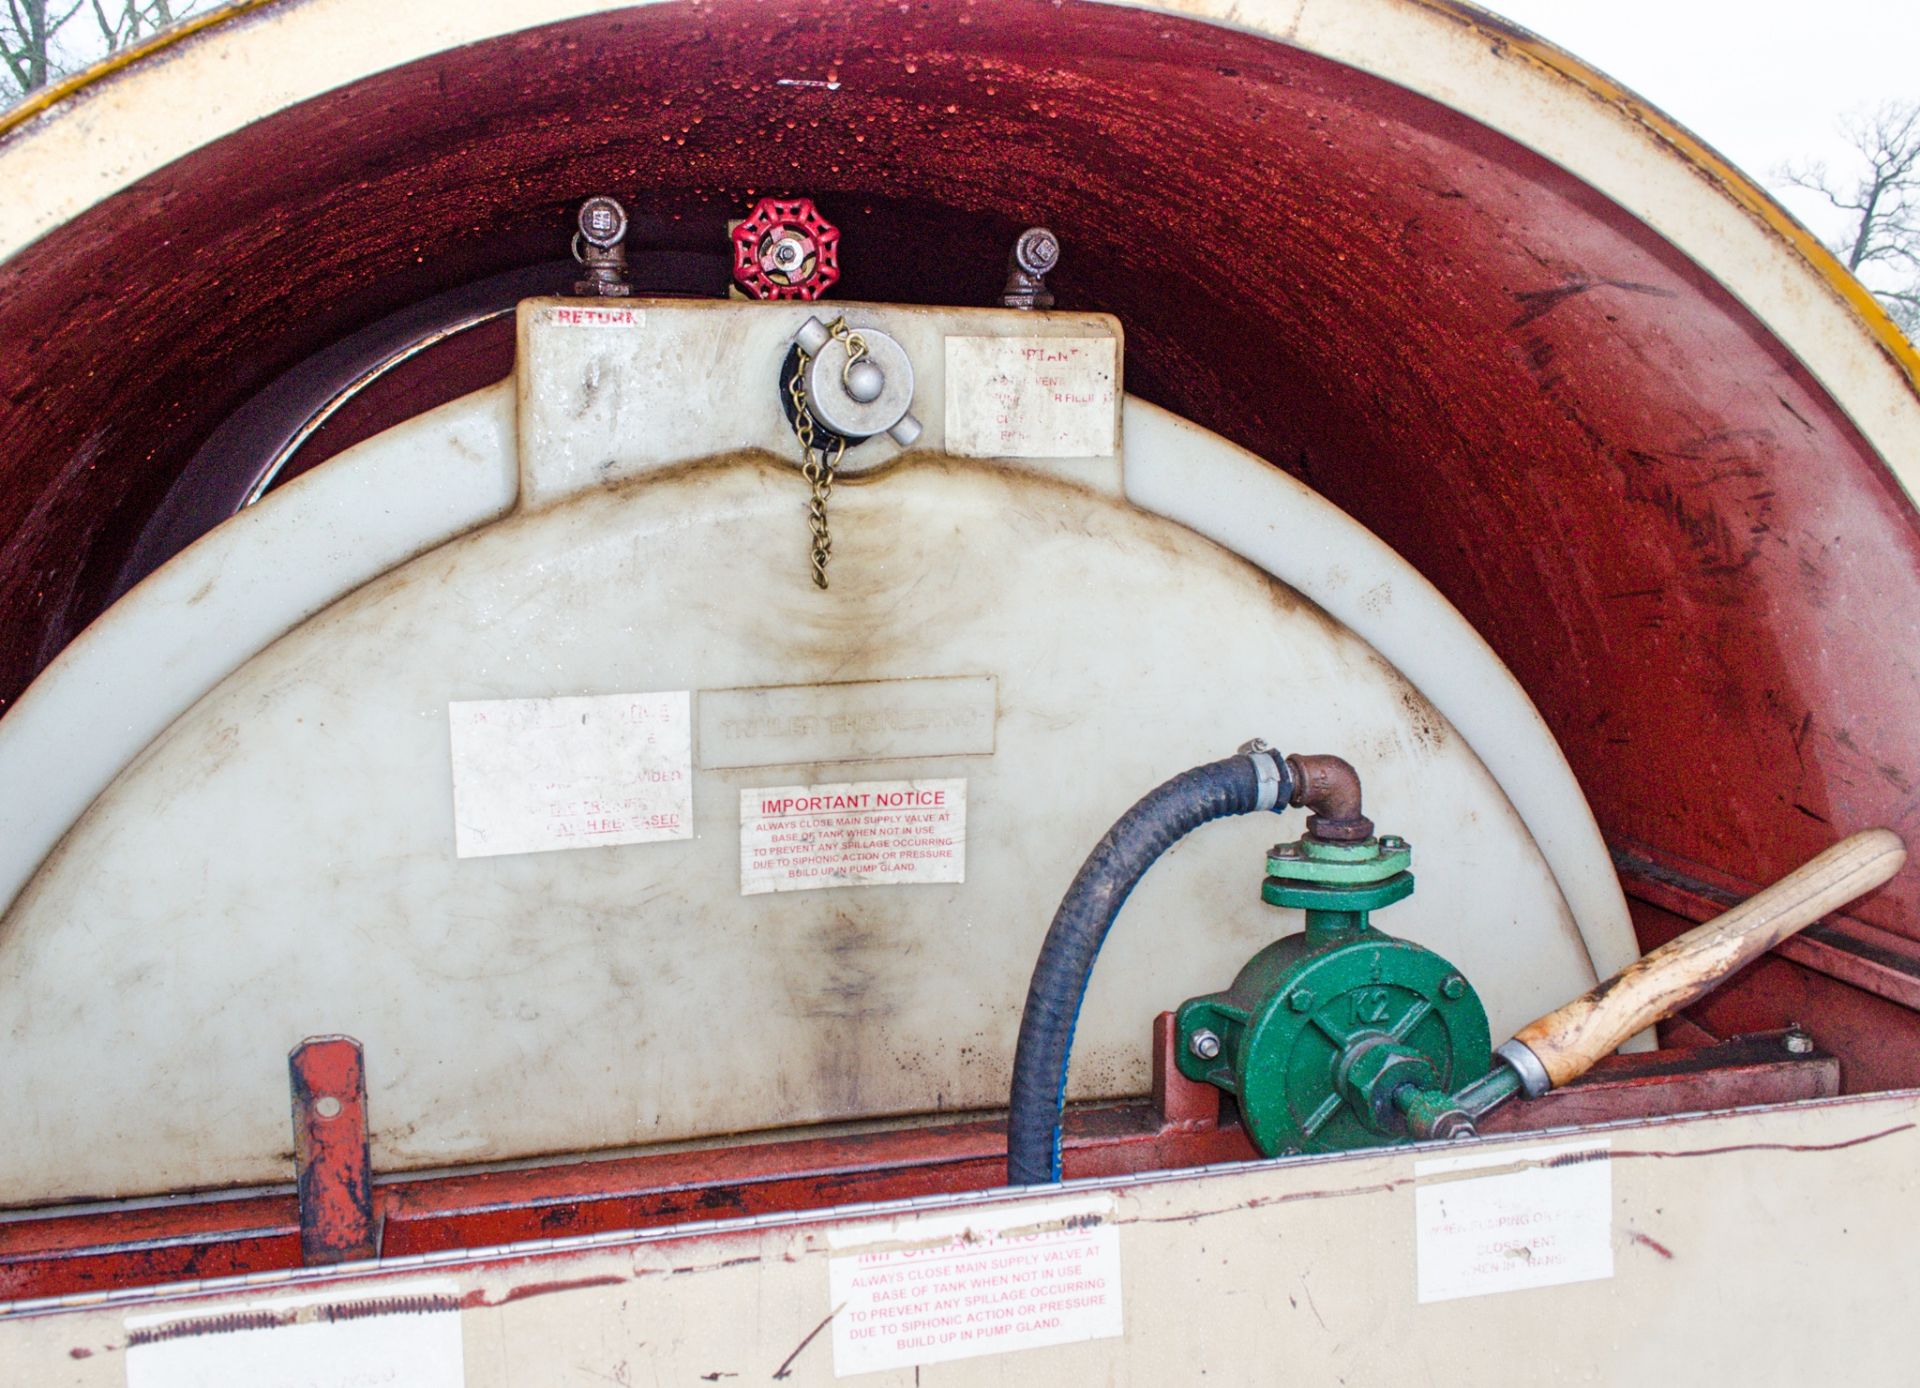 Trailer Engineering 500 gallon site tow bunded fuel bowser c/w manual pump, delivery hose & nozzle - Image 3 of 3